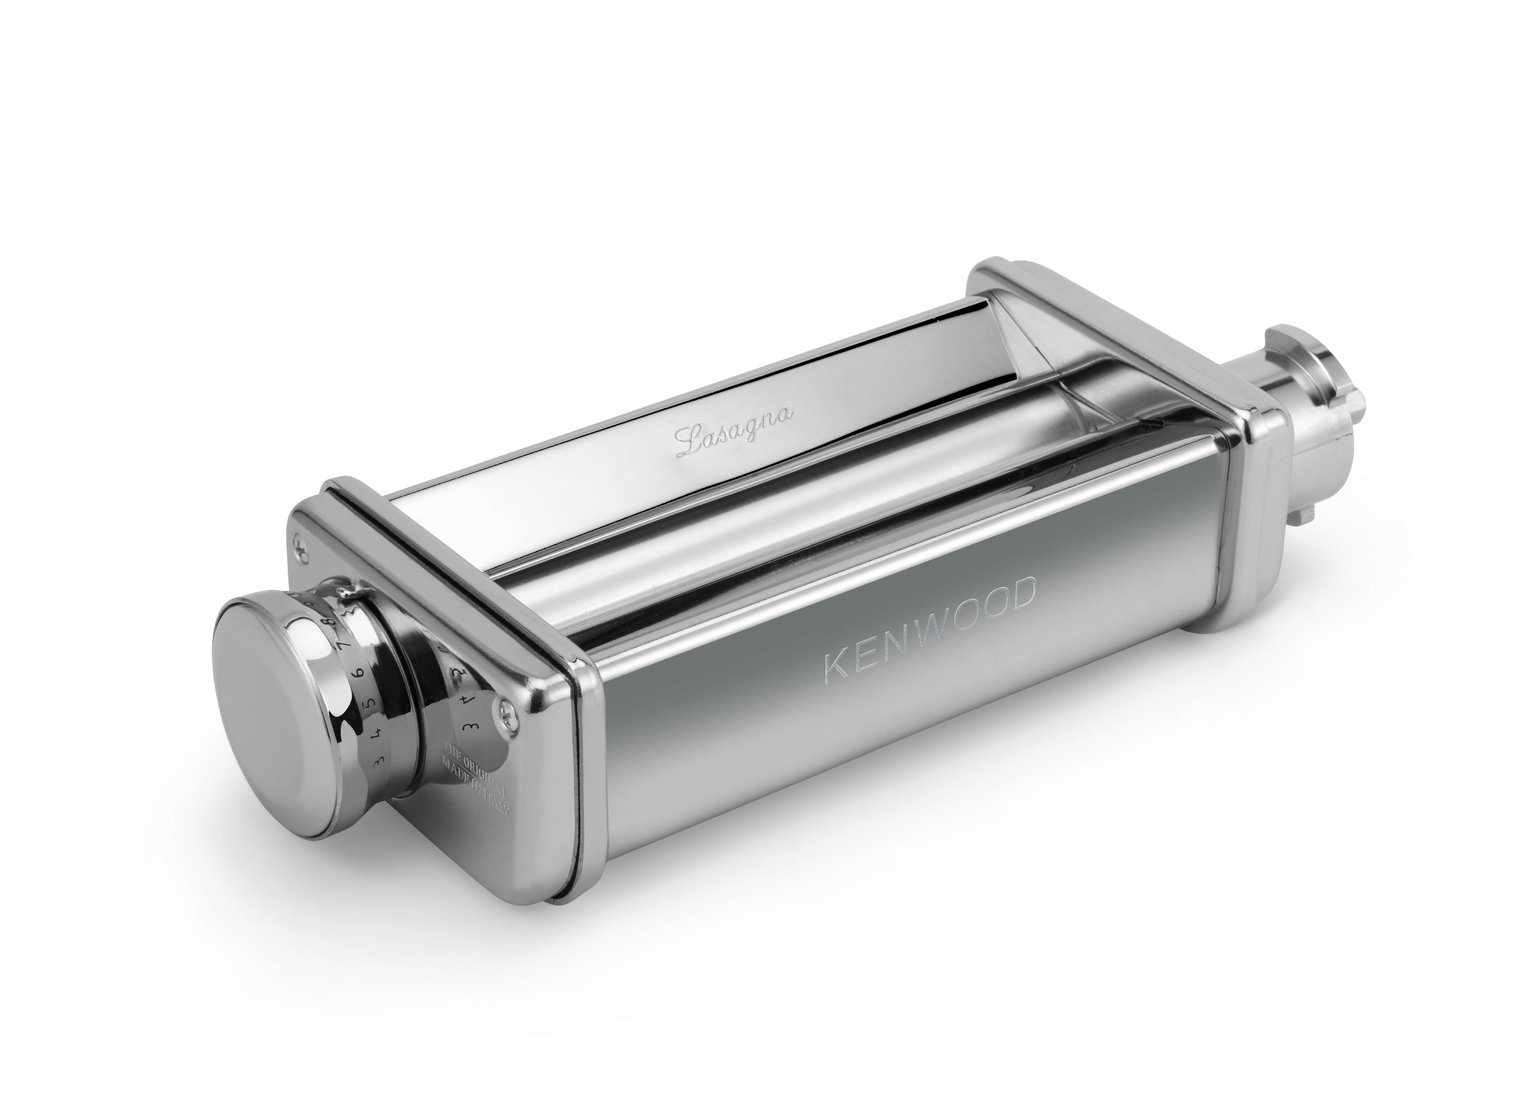 Kenwood KAX97OME Pasta Roller - Stainless Steel